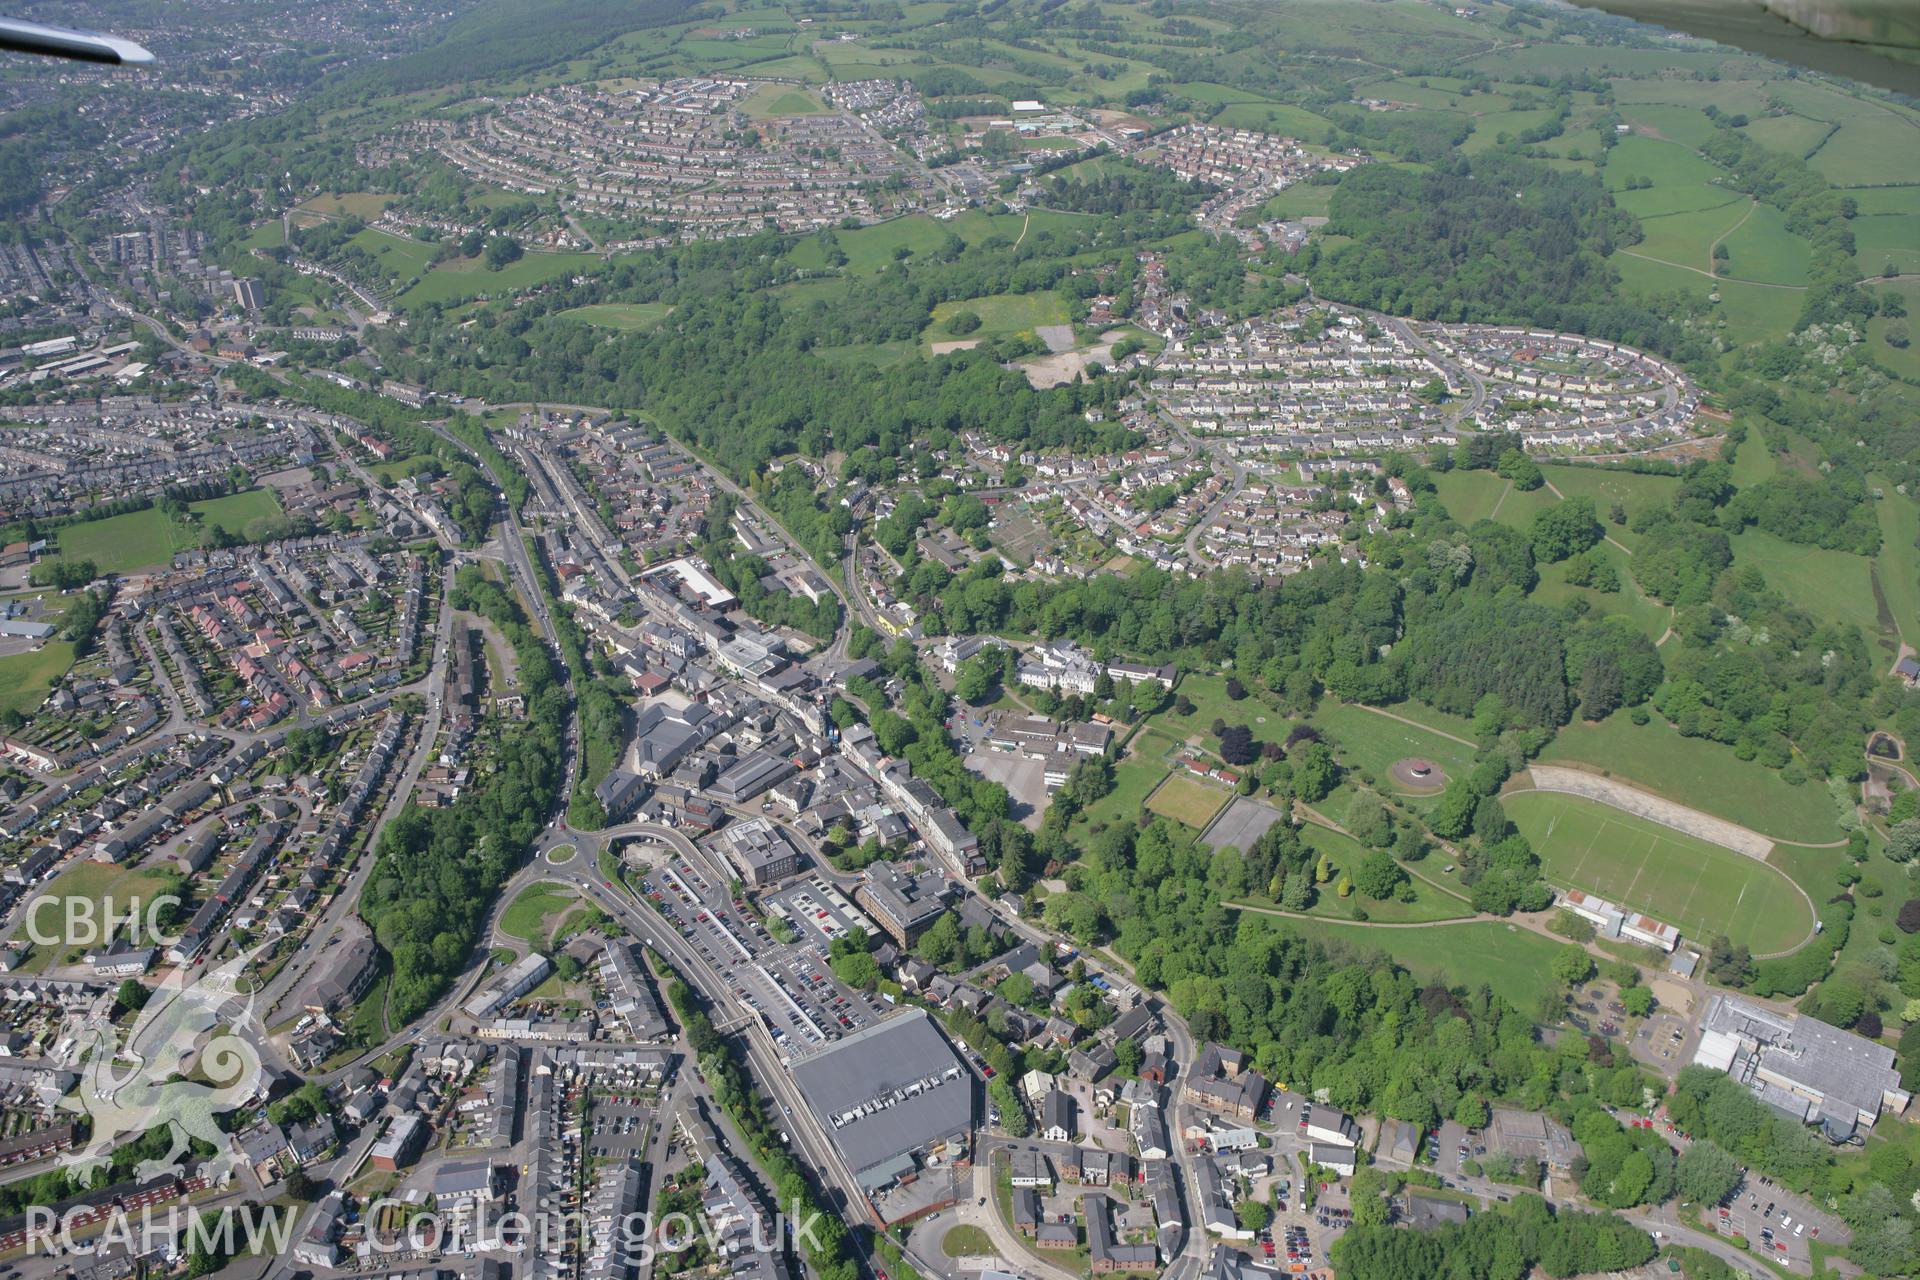 RCAHMW colour oblique photograph of Pontypool. Taken by Toby Driver on 24/05/2010.